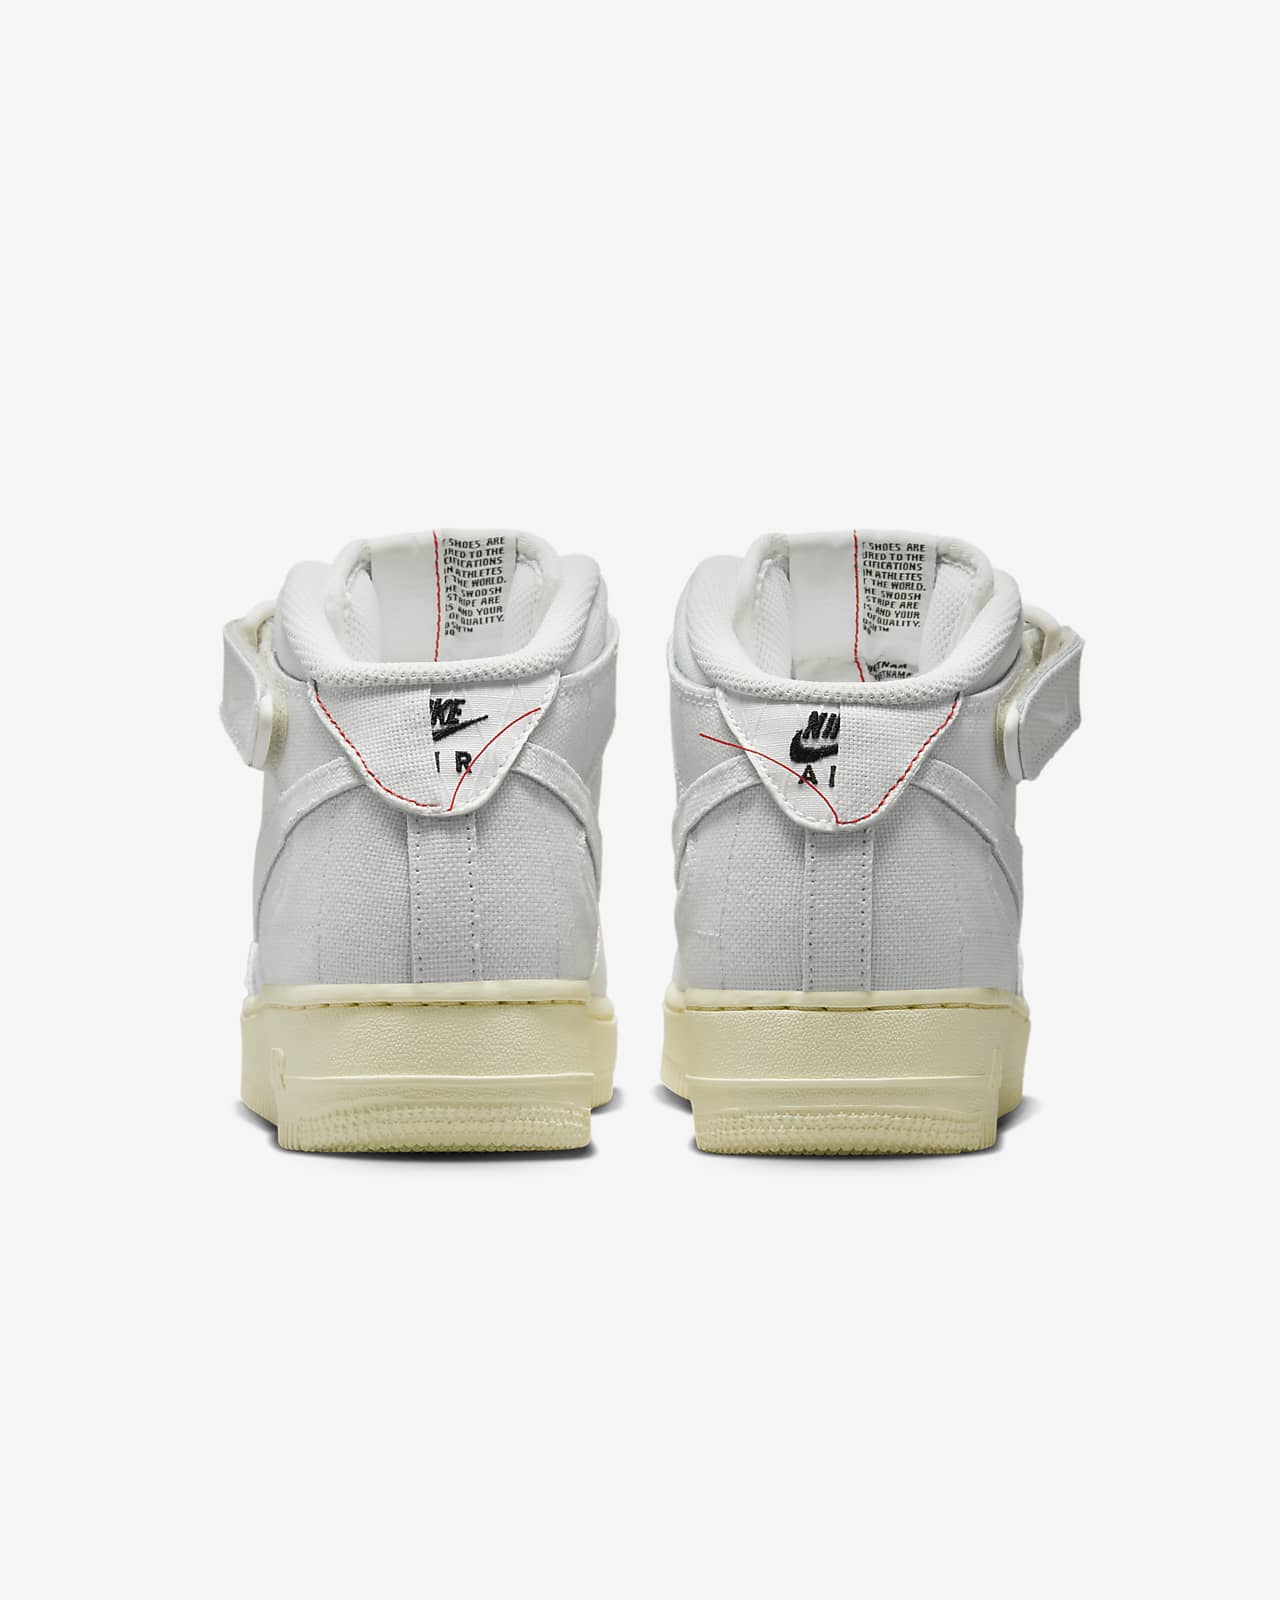 Nike Off-White Air Force 1 '07 LX Sneakers